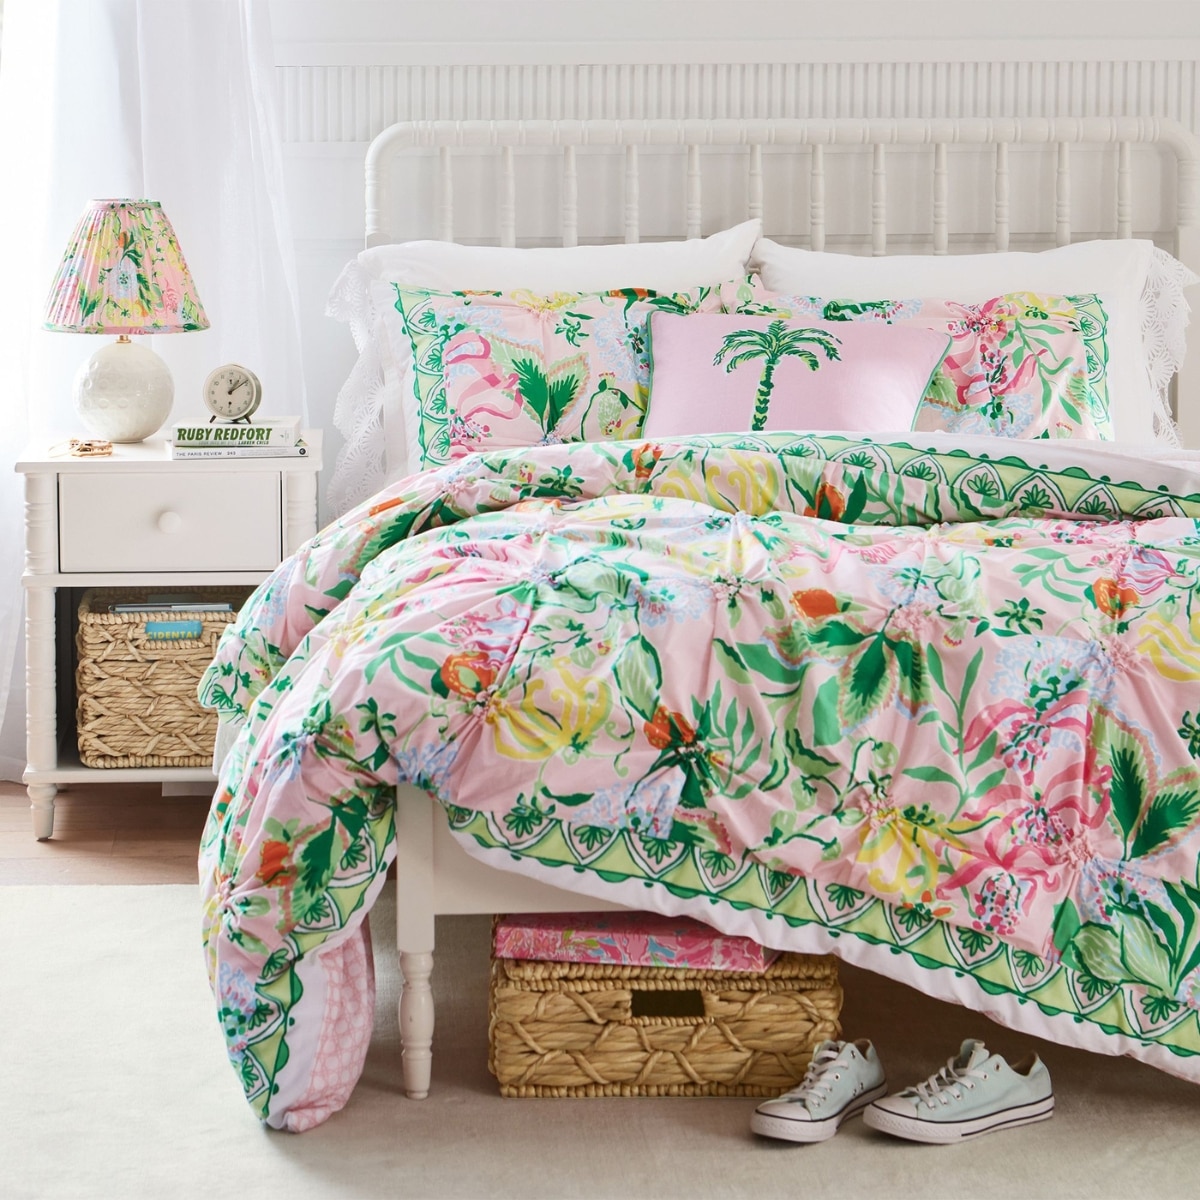 Psst! There’s an Exclusive Lilly Pulitzer Collab at Pottery Barn Teen